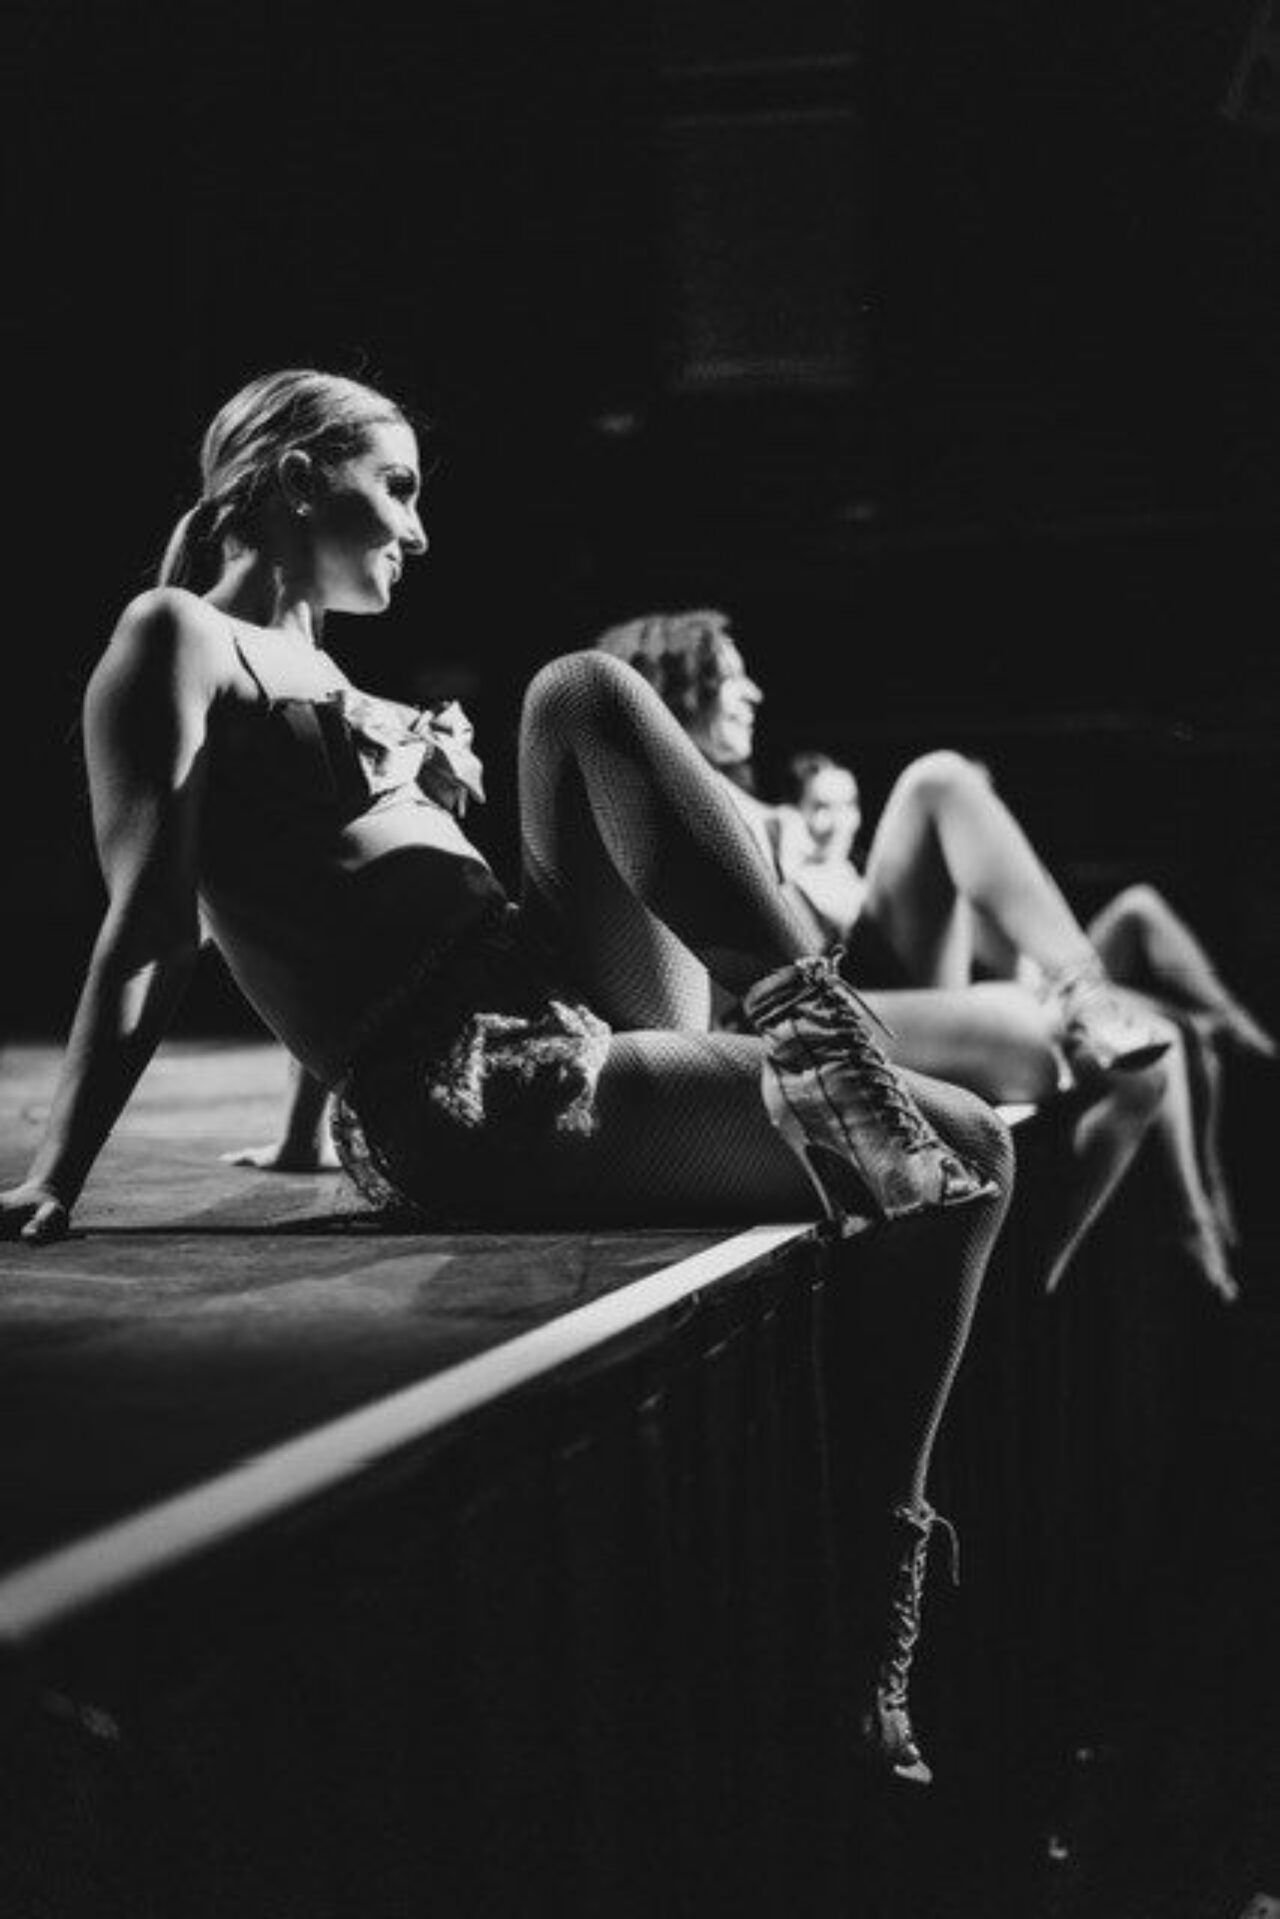 Dancers in fishnets and high heels sitting on the edge of a stage